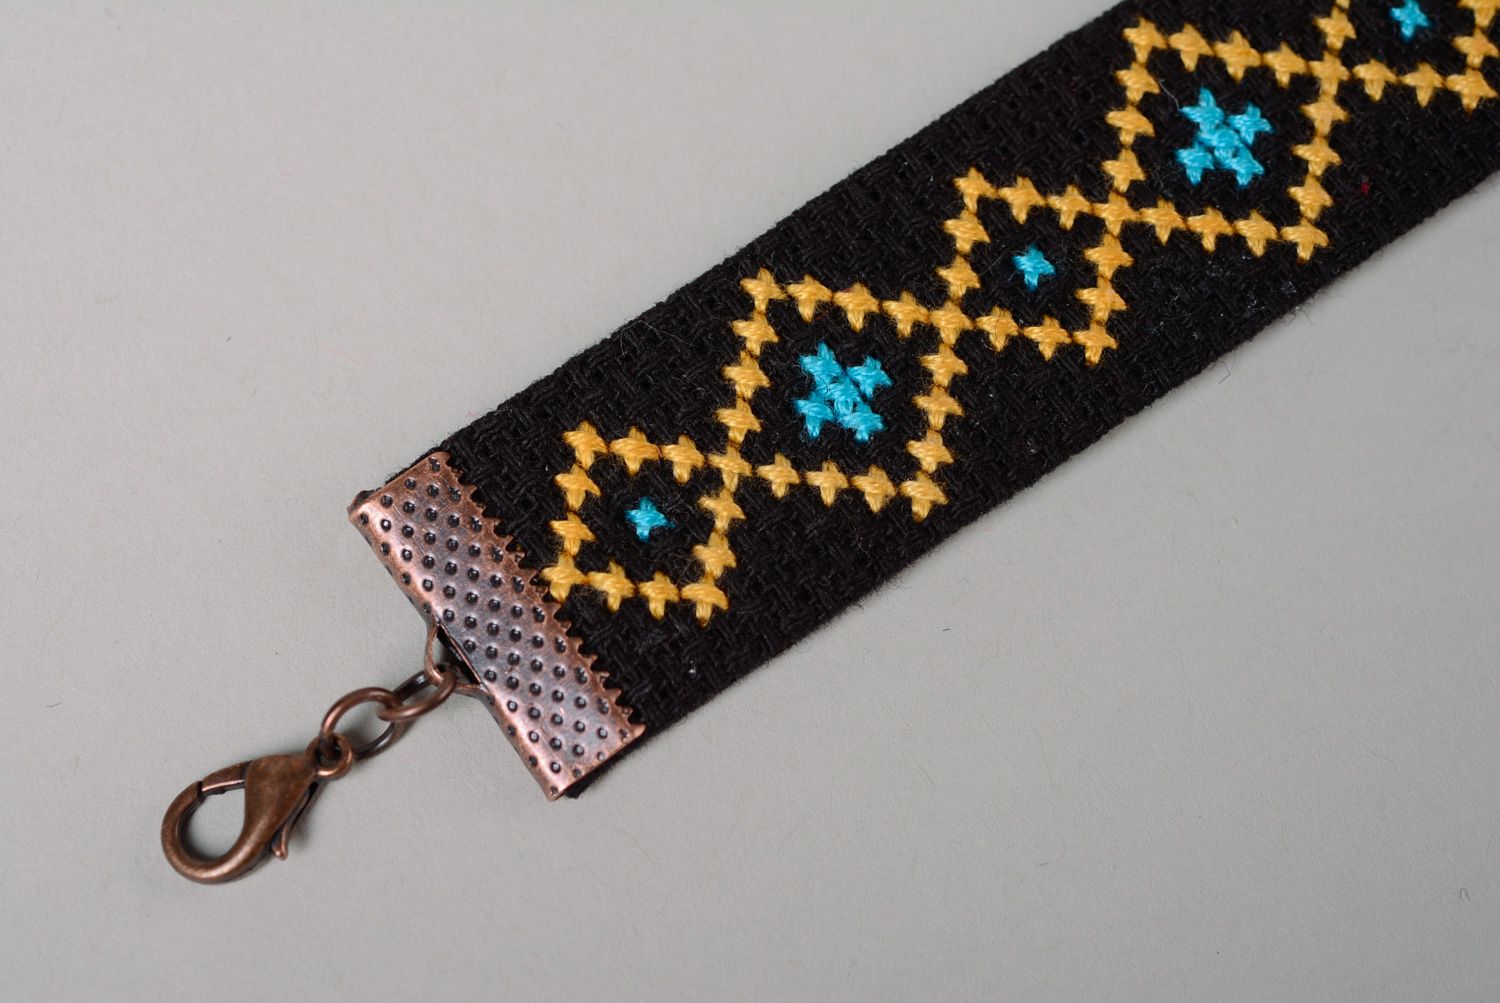 Homemade cross stitch embroidered textile bracelet photo 3